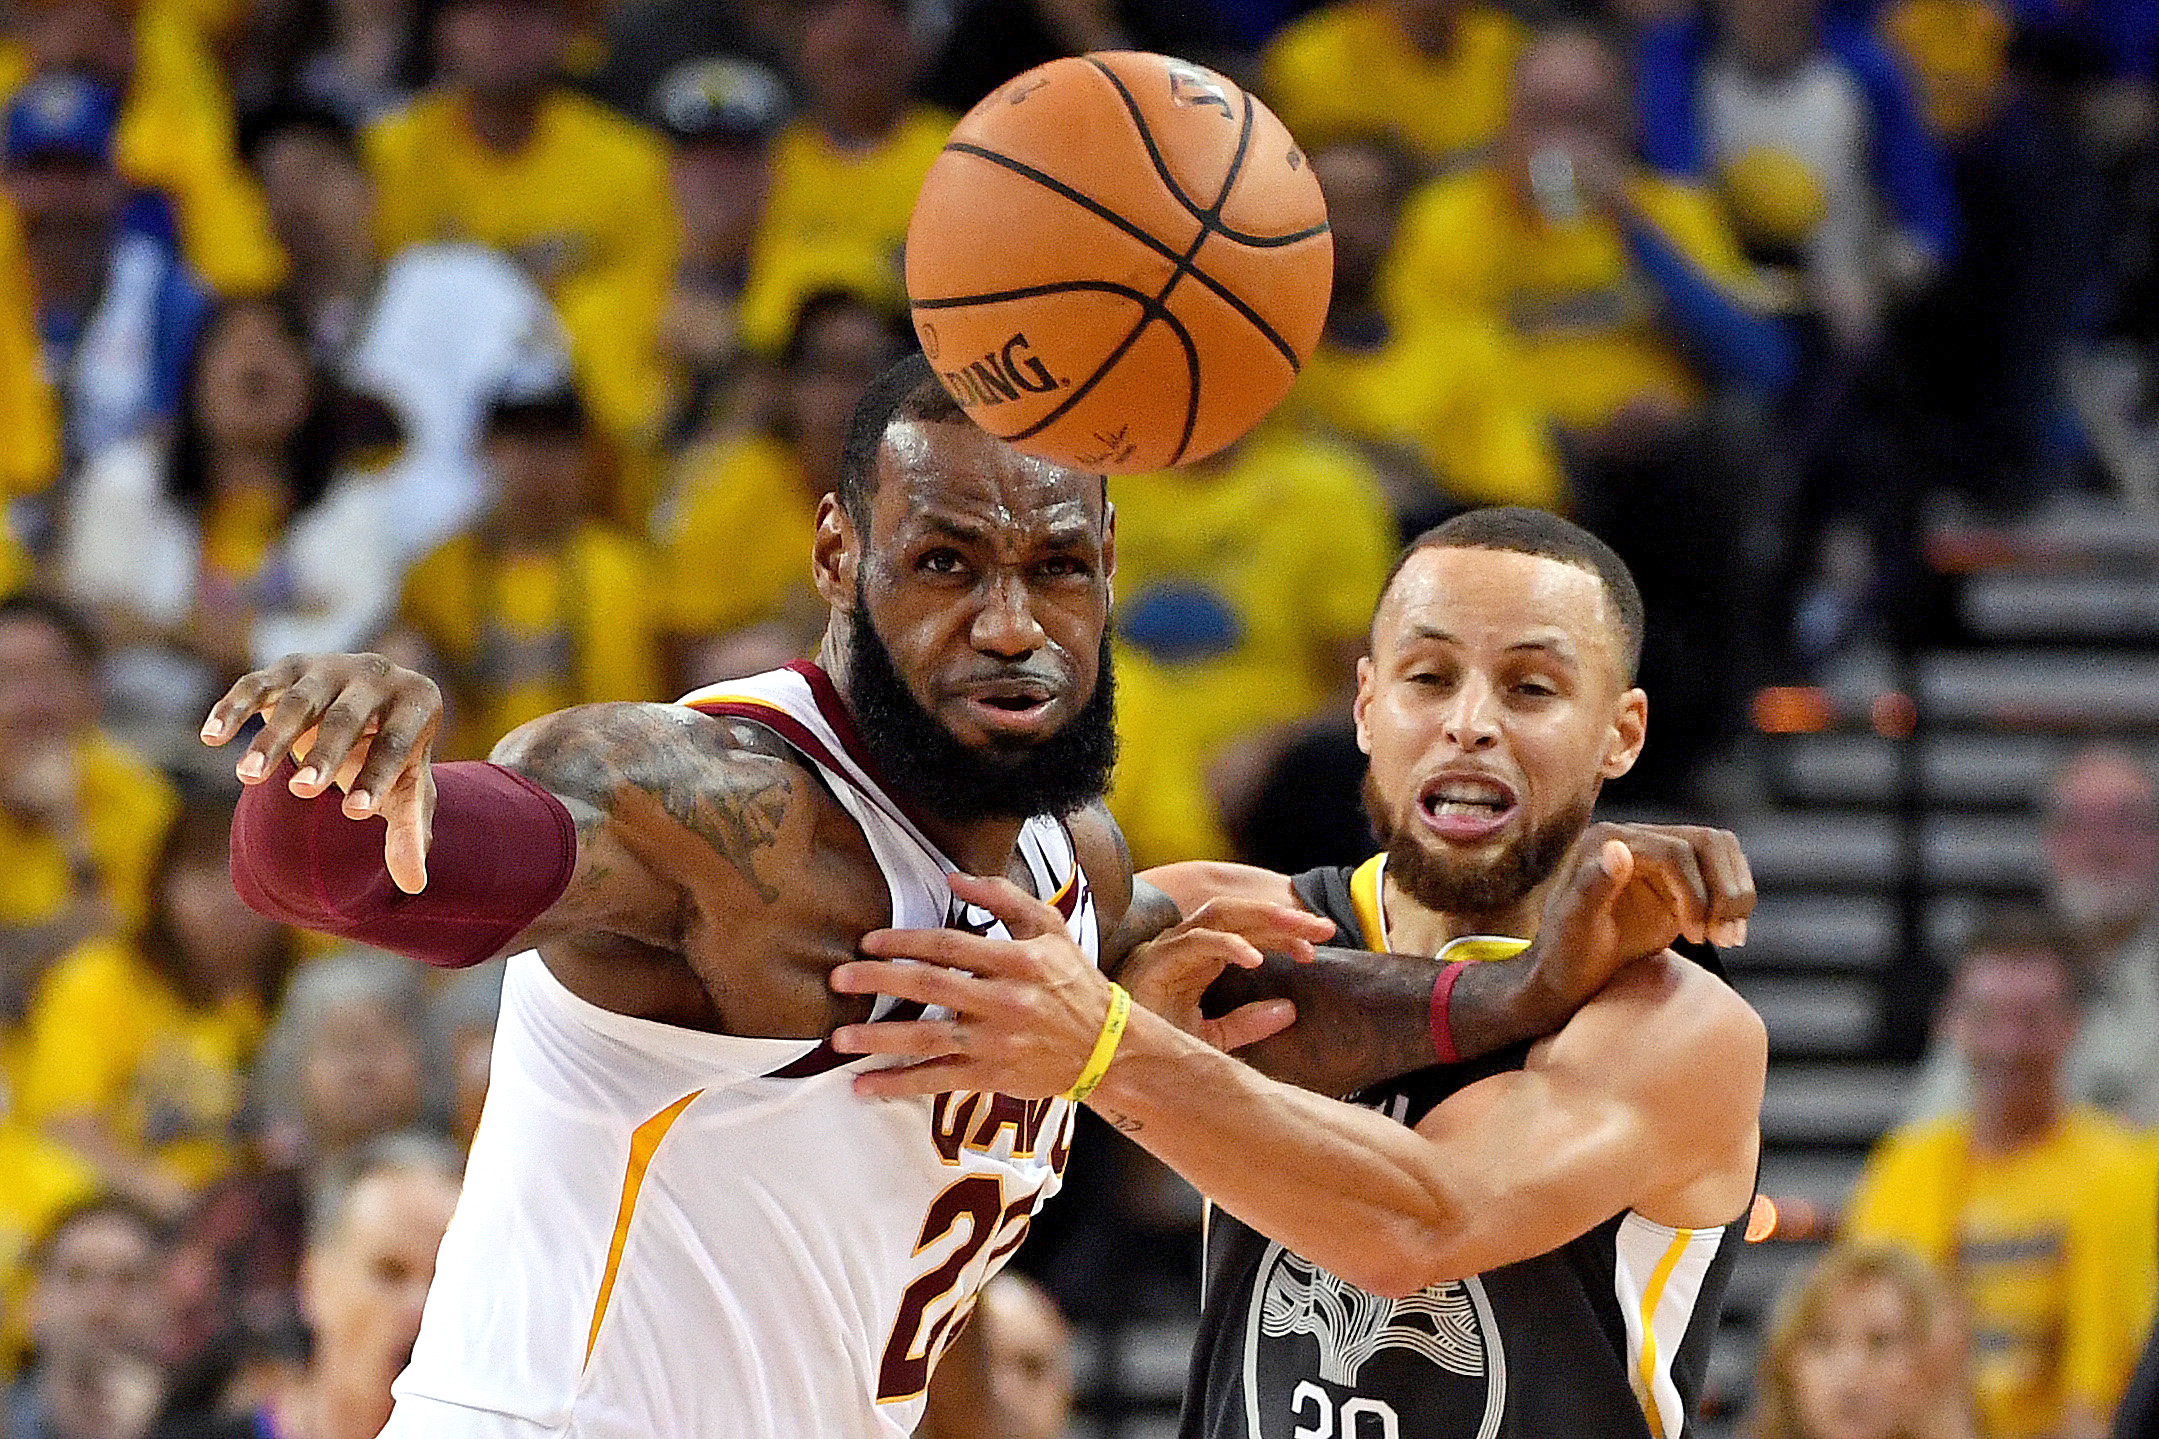 PHOTO: Golden State Warriors guard Stephen Curry (30) and Cleveland Cavaliers forward LeBron James (23) go for a loose ball during the second quarter in game one of the 2018 NBA Finals at Oracle Arena, June 3, 2018, Oakland, Calif.